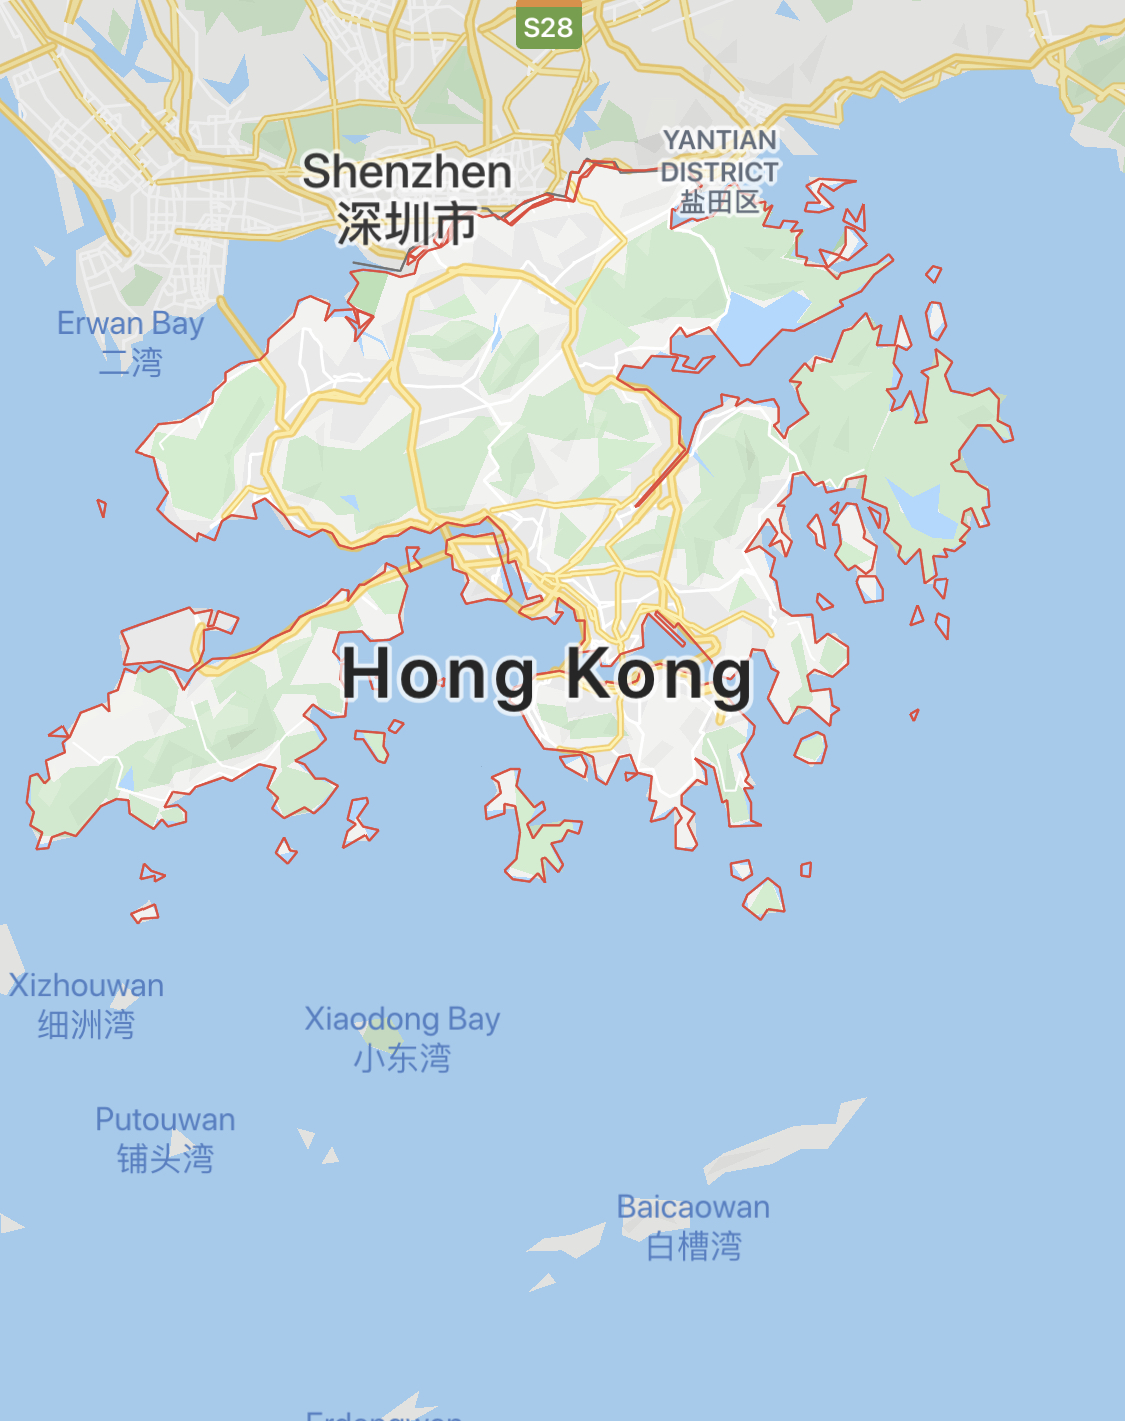 Goods from Hong Kong must be labeled “made in China” – International